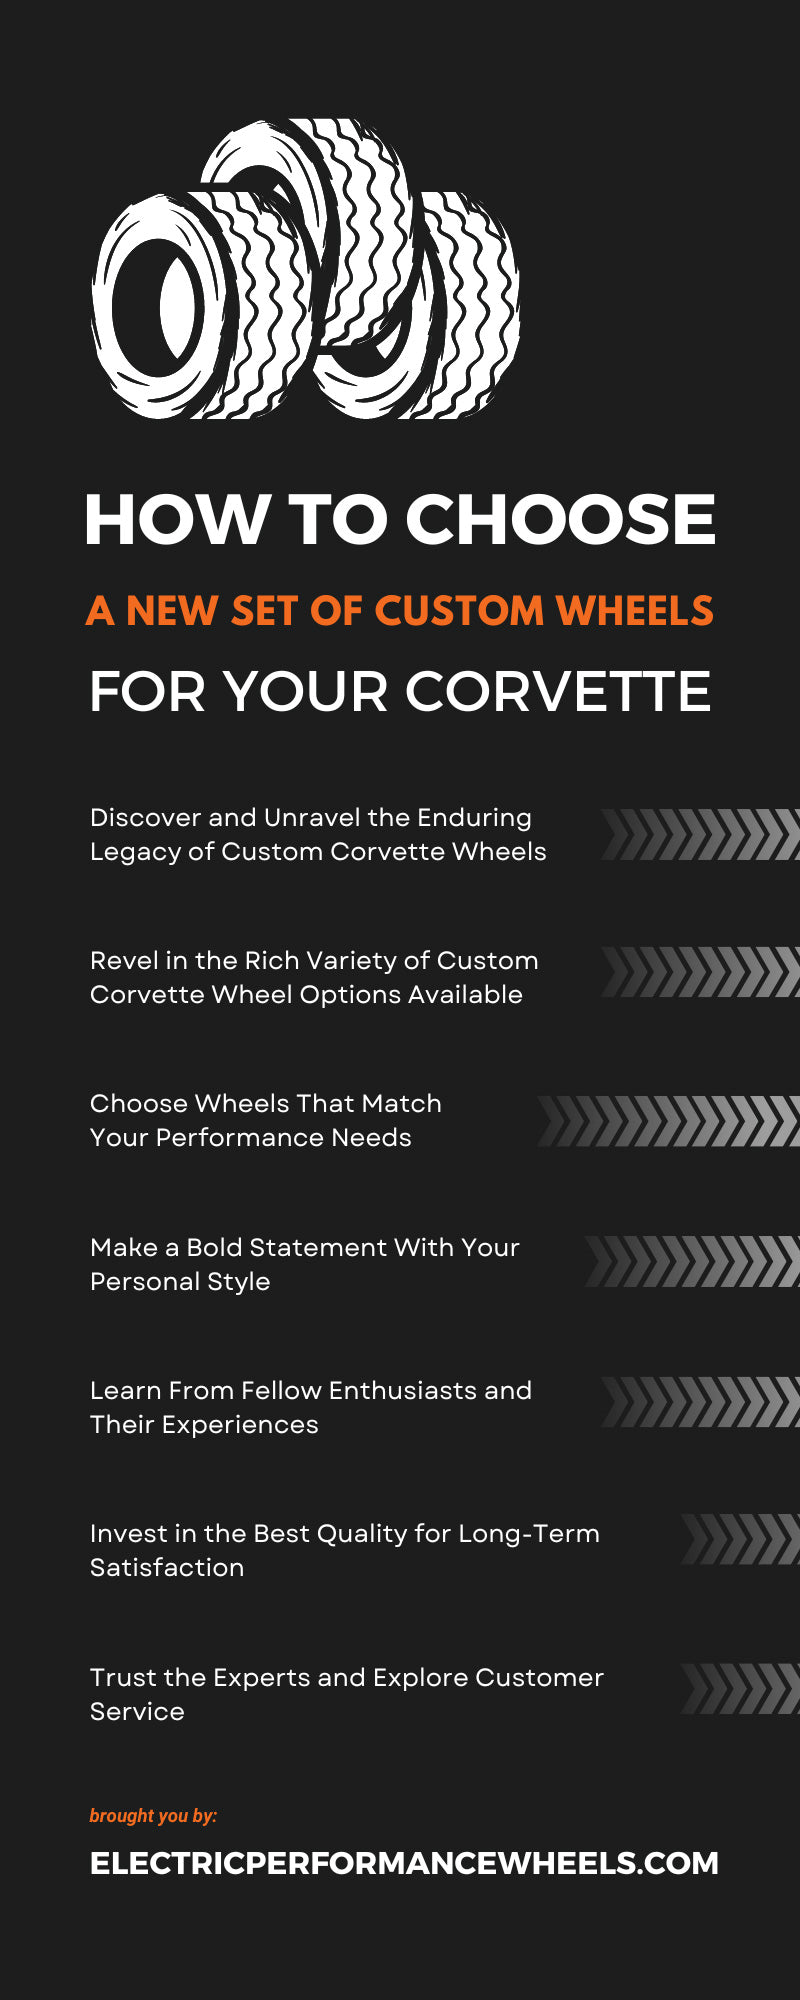 How To Choose a New Set of Custom Wheels for Your Corvette